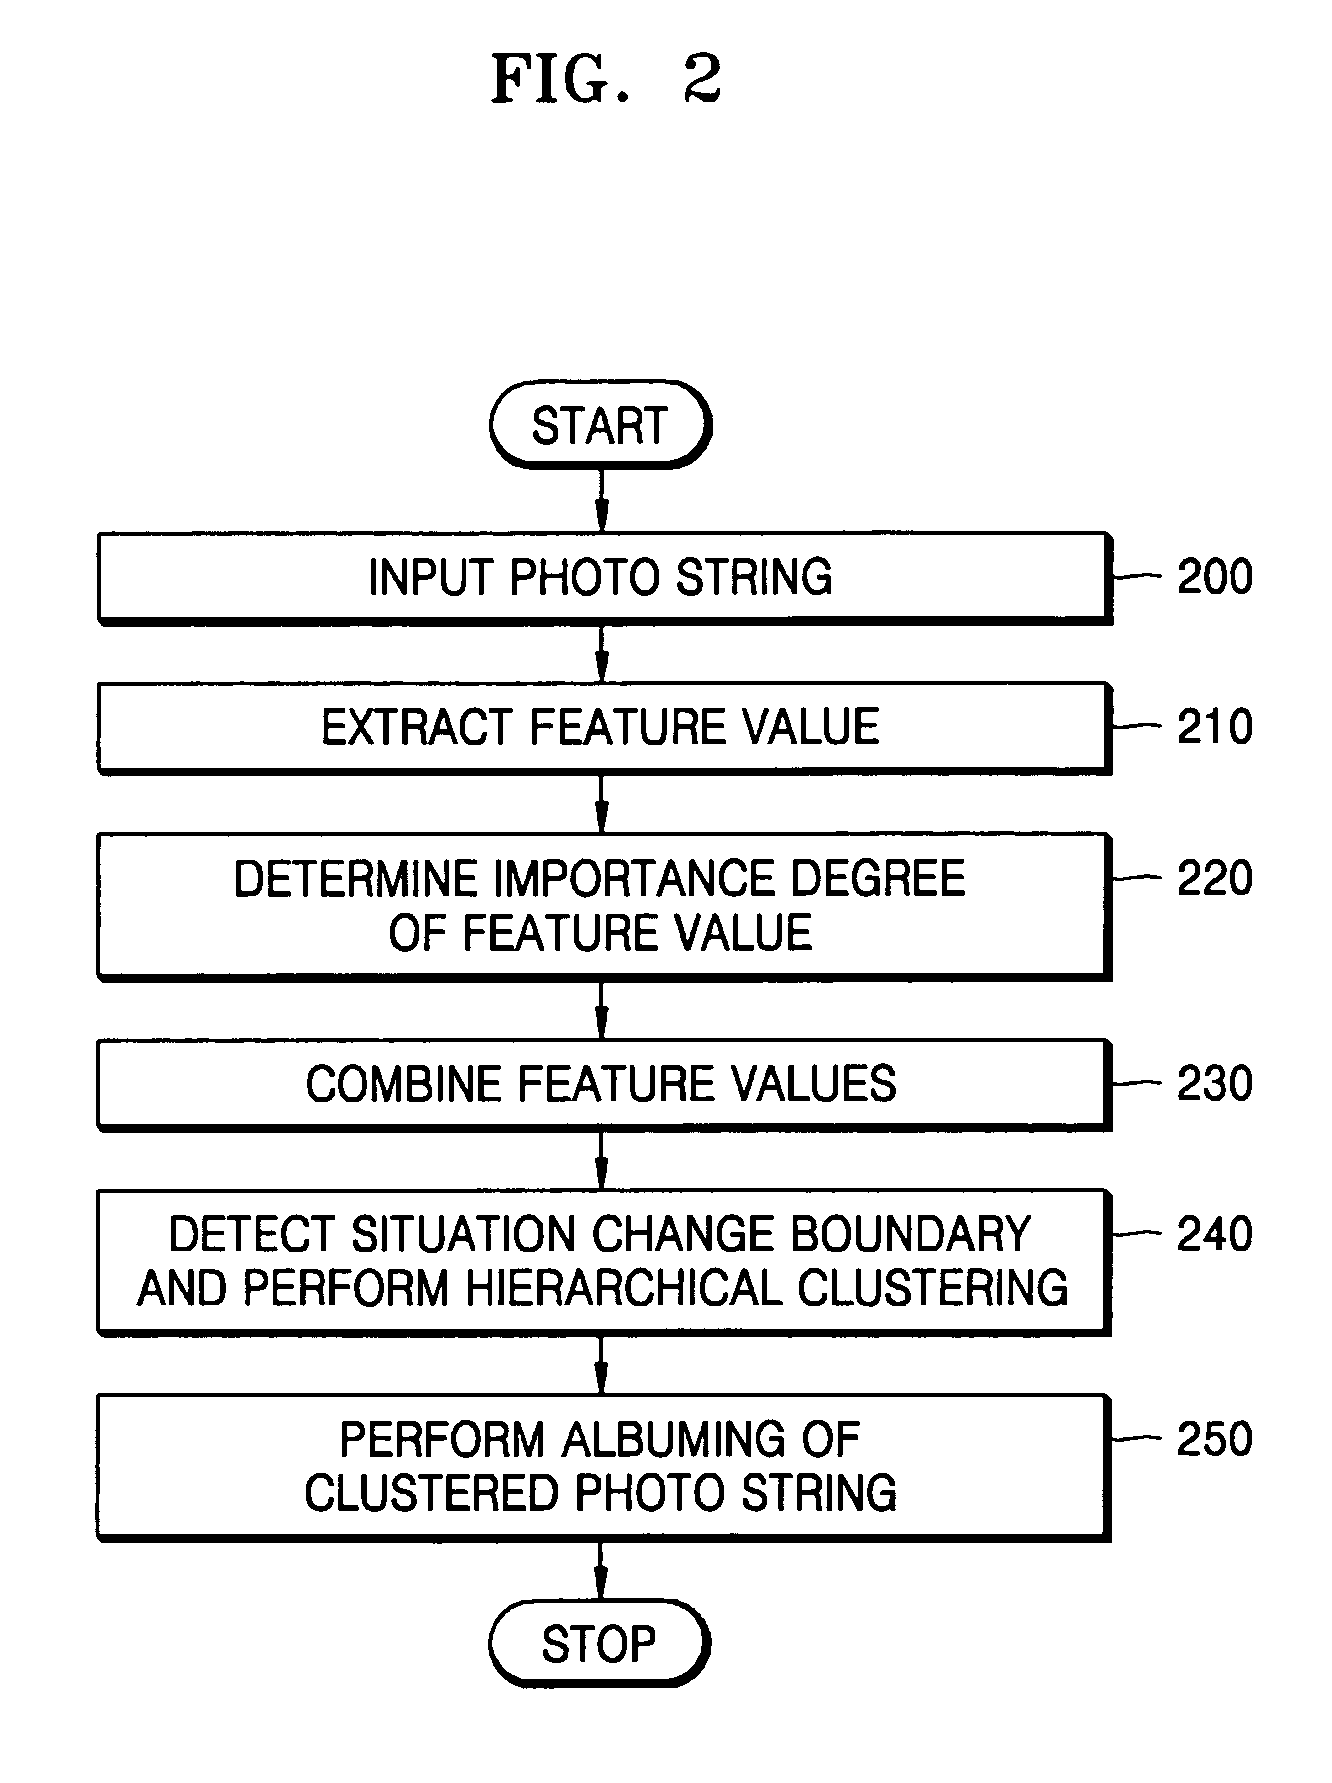 Method and apparatus for clustering digital photos based on situation and system and method for albuming using the same